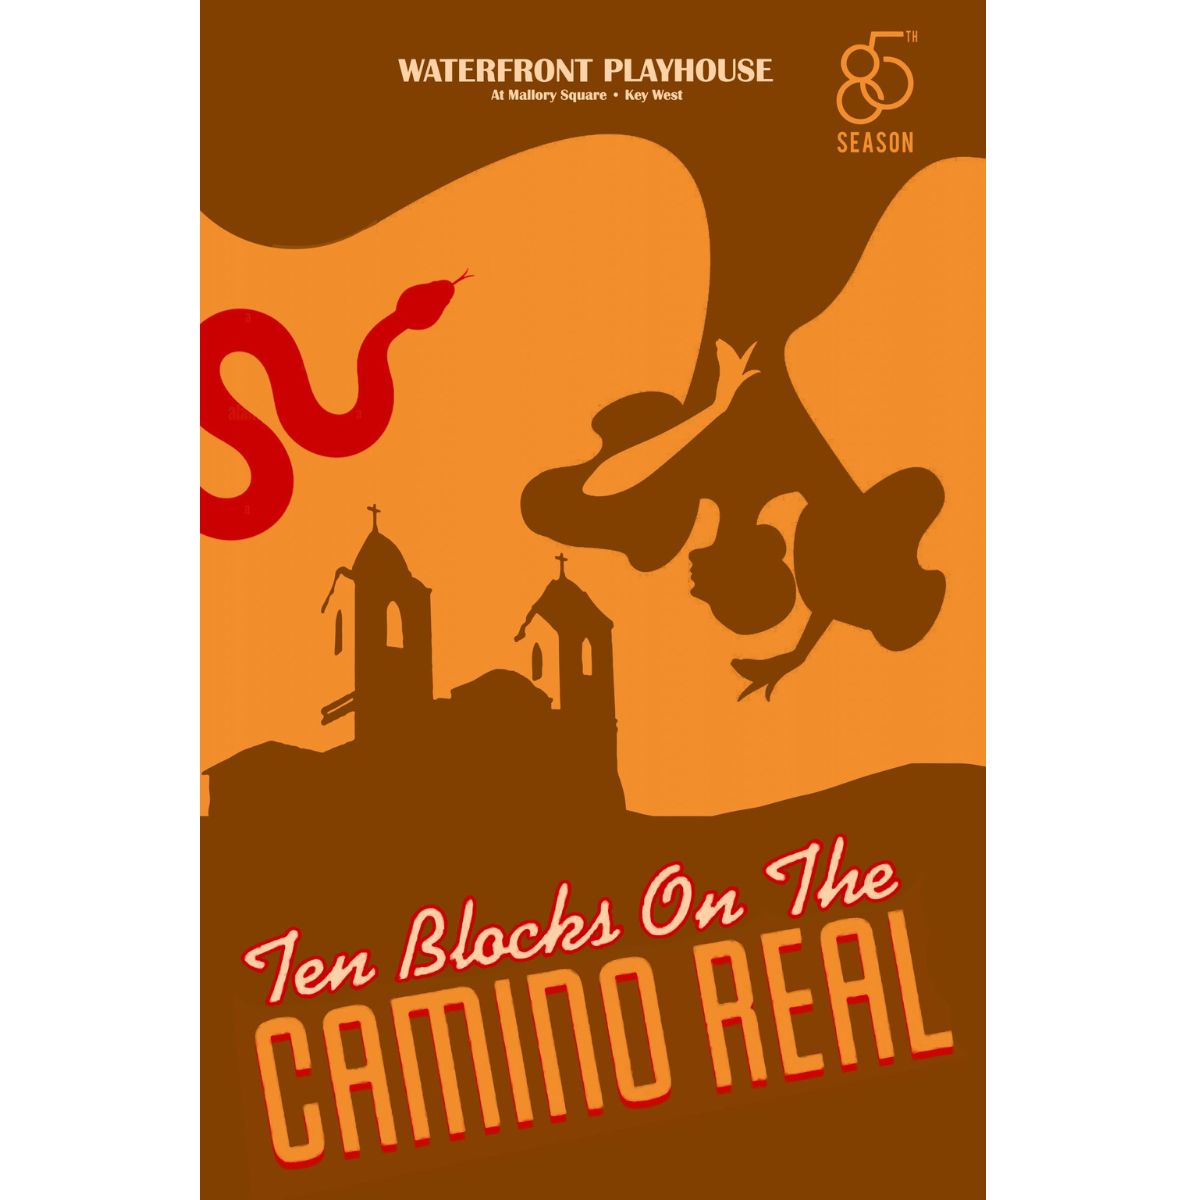 Ten Blocks on the Camino Real at the Waterfront Playhouse